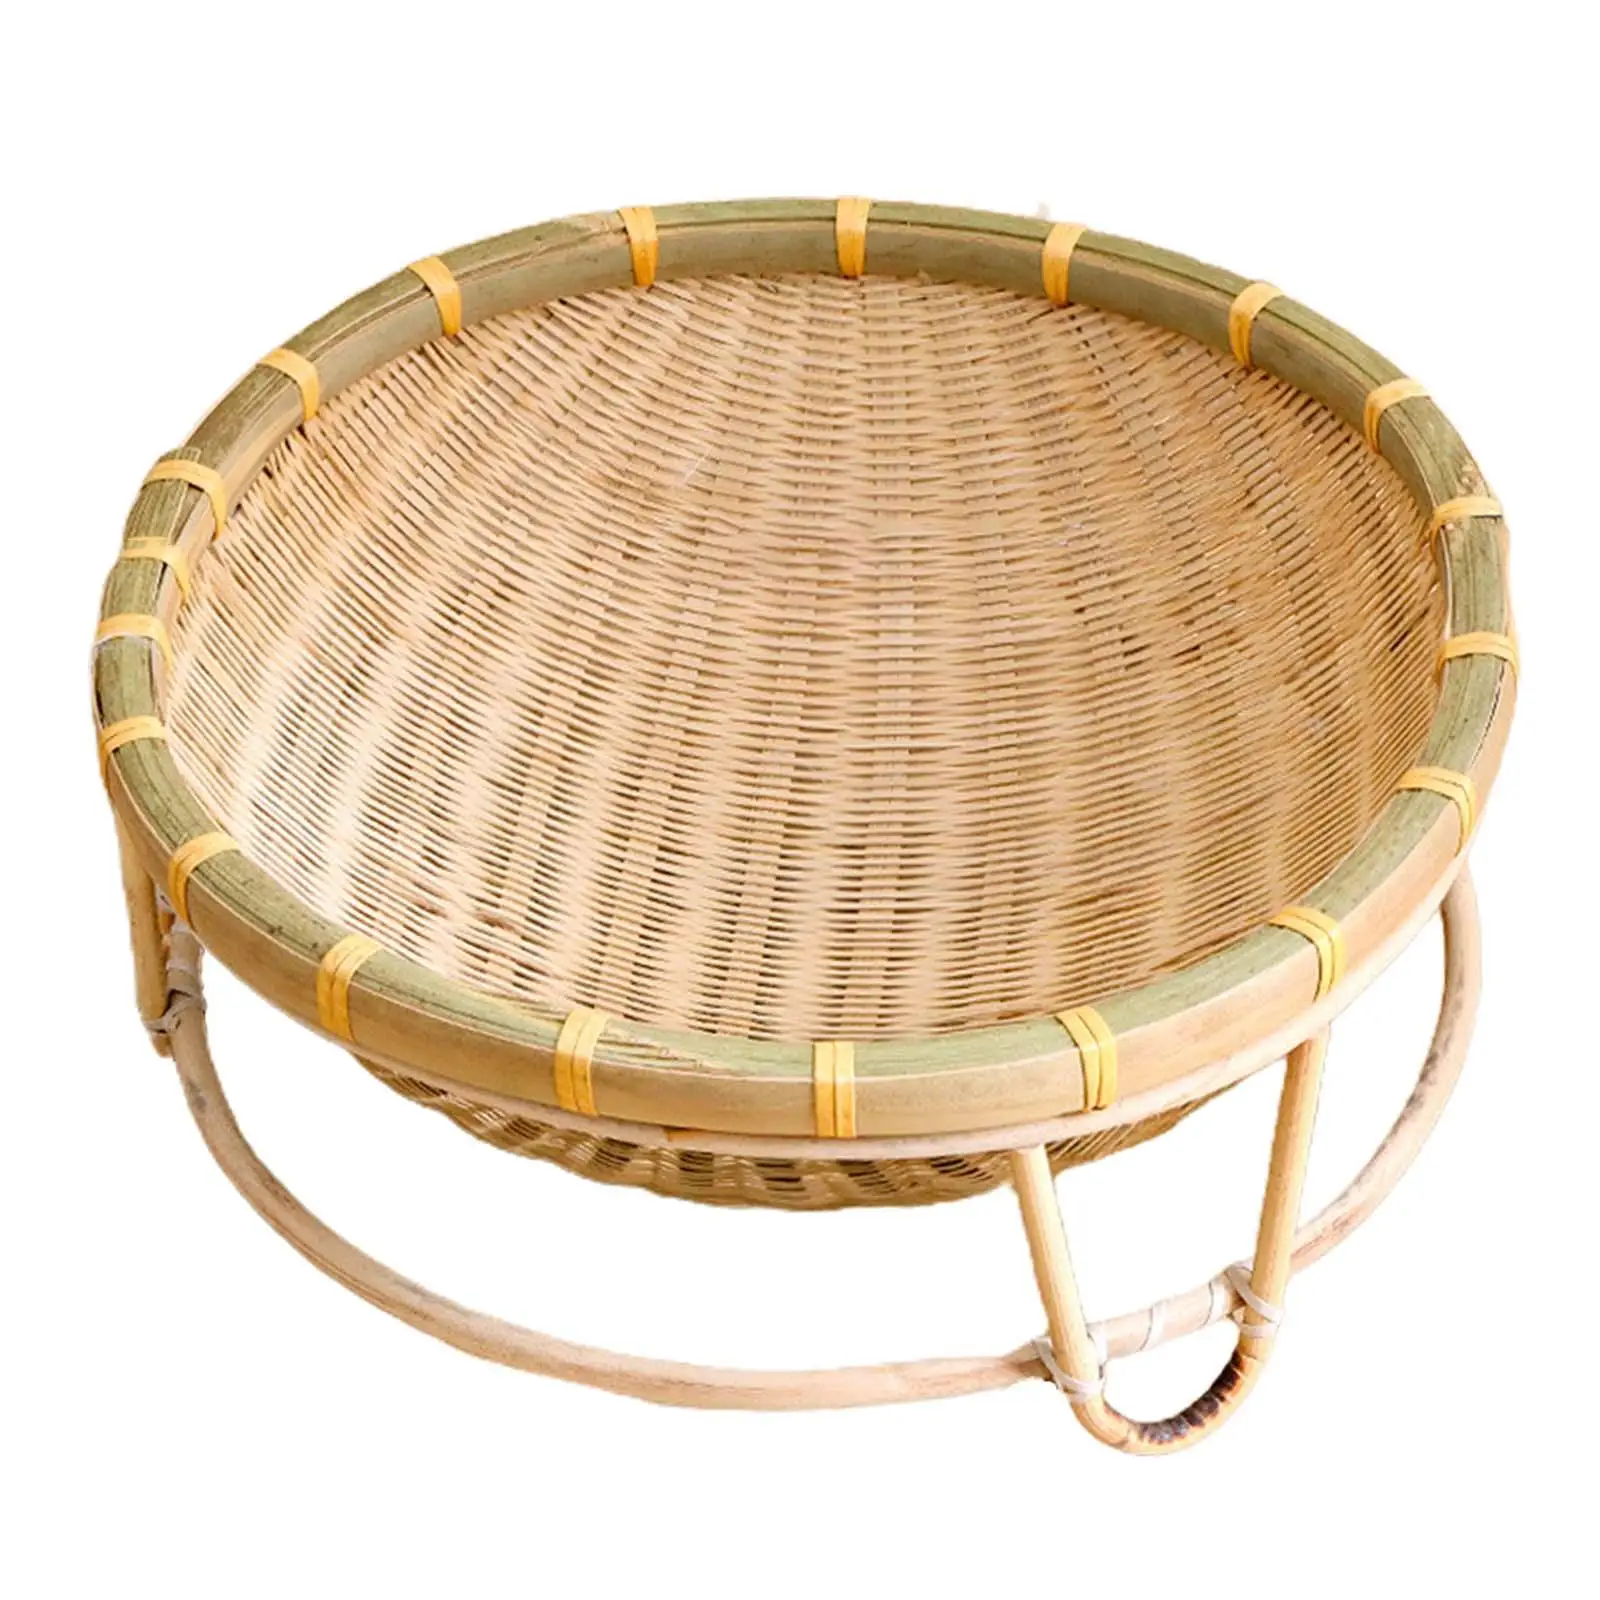 Bamboo Woven Cat Nest Lightweight Home Free Standing Semi Enclosed Cat Bed Portable for Puppy Small Medium Cats Kitten Supplies